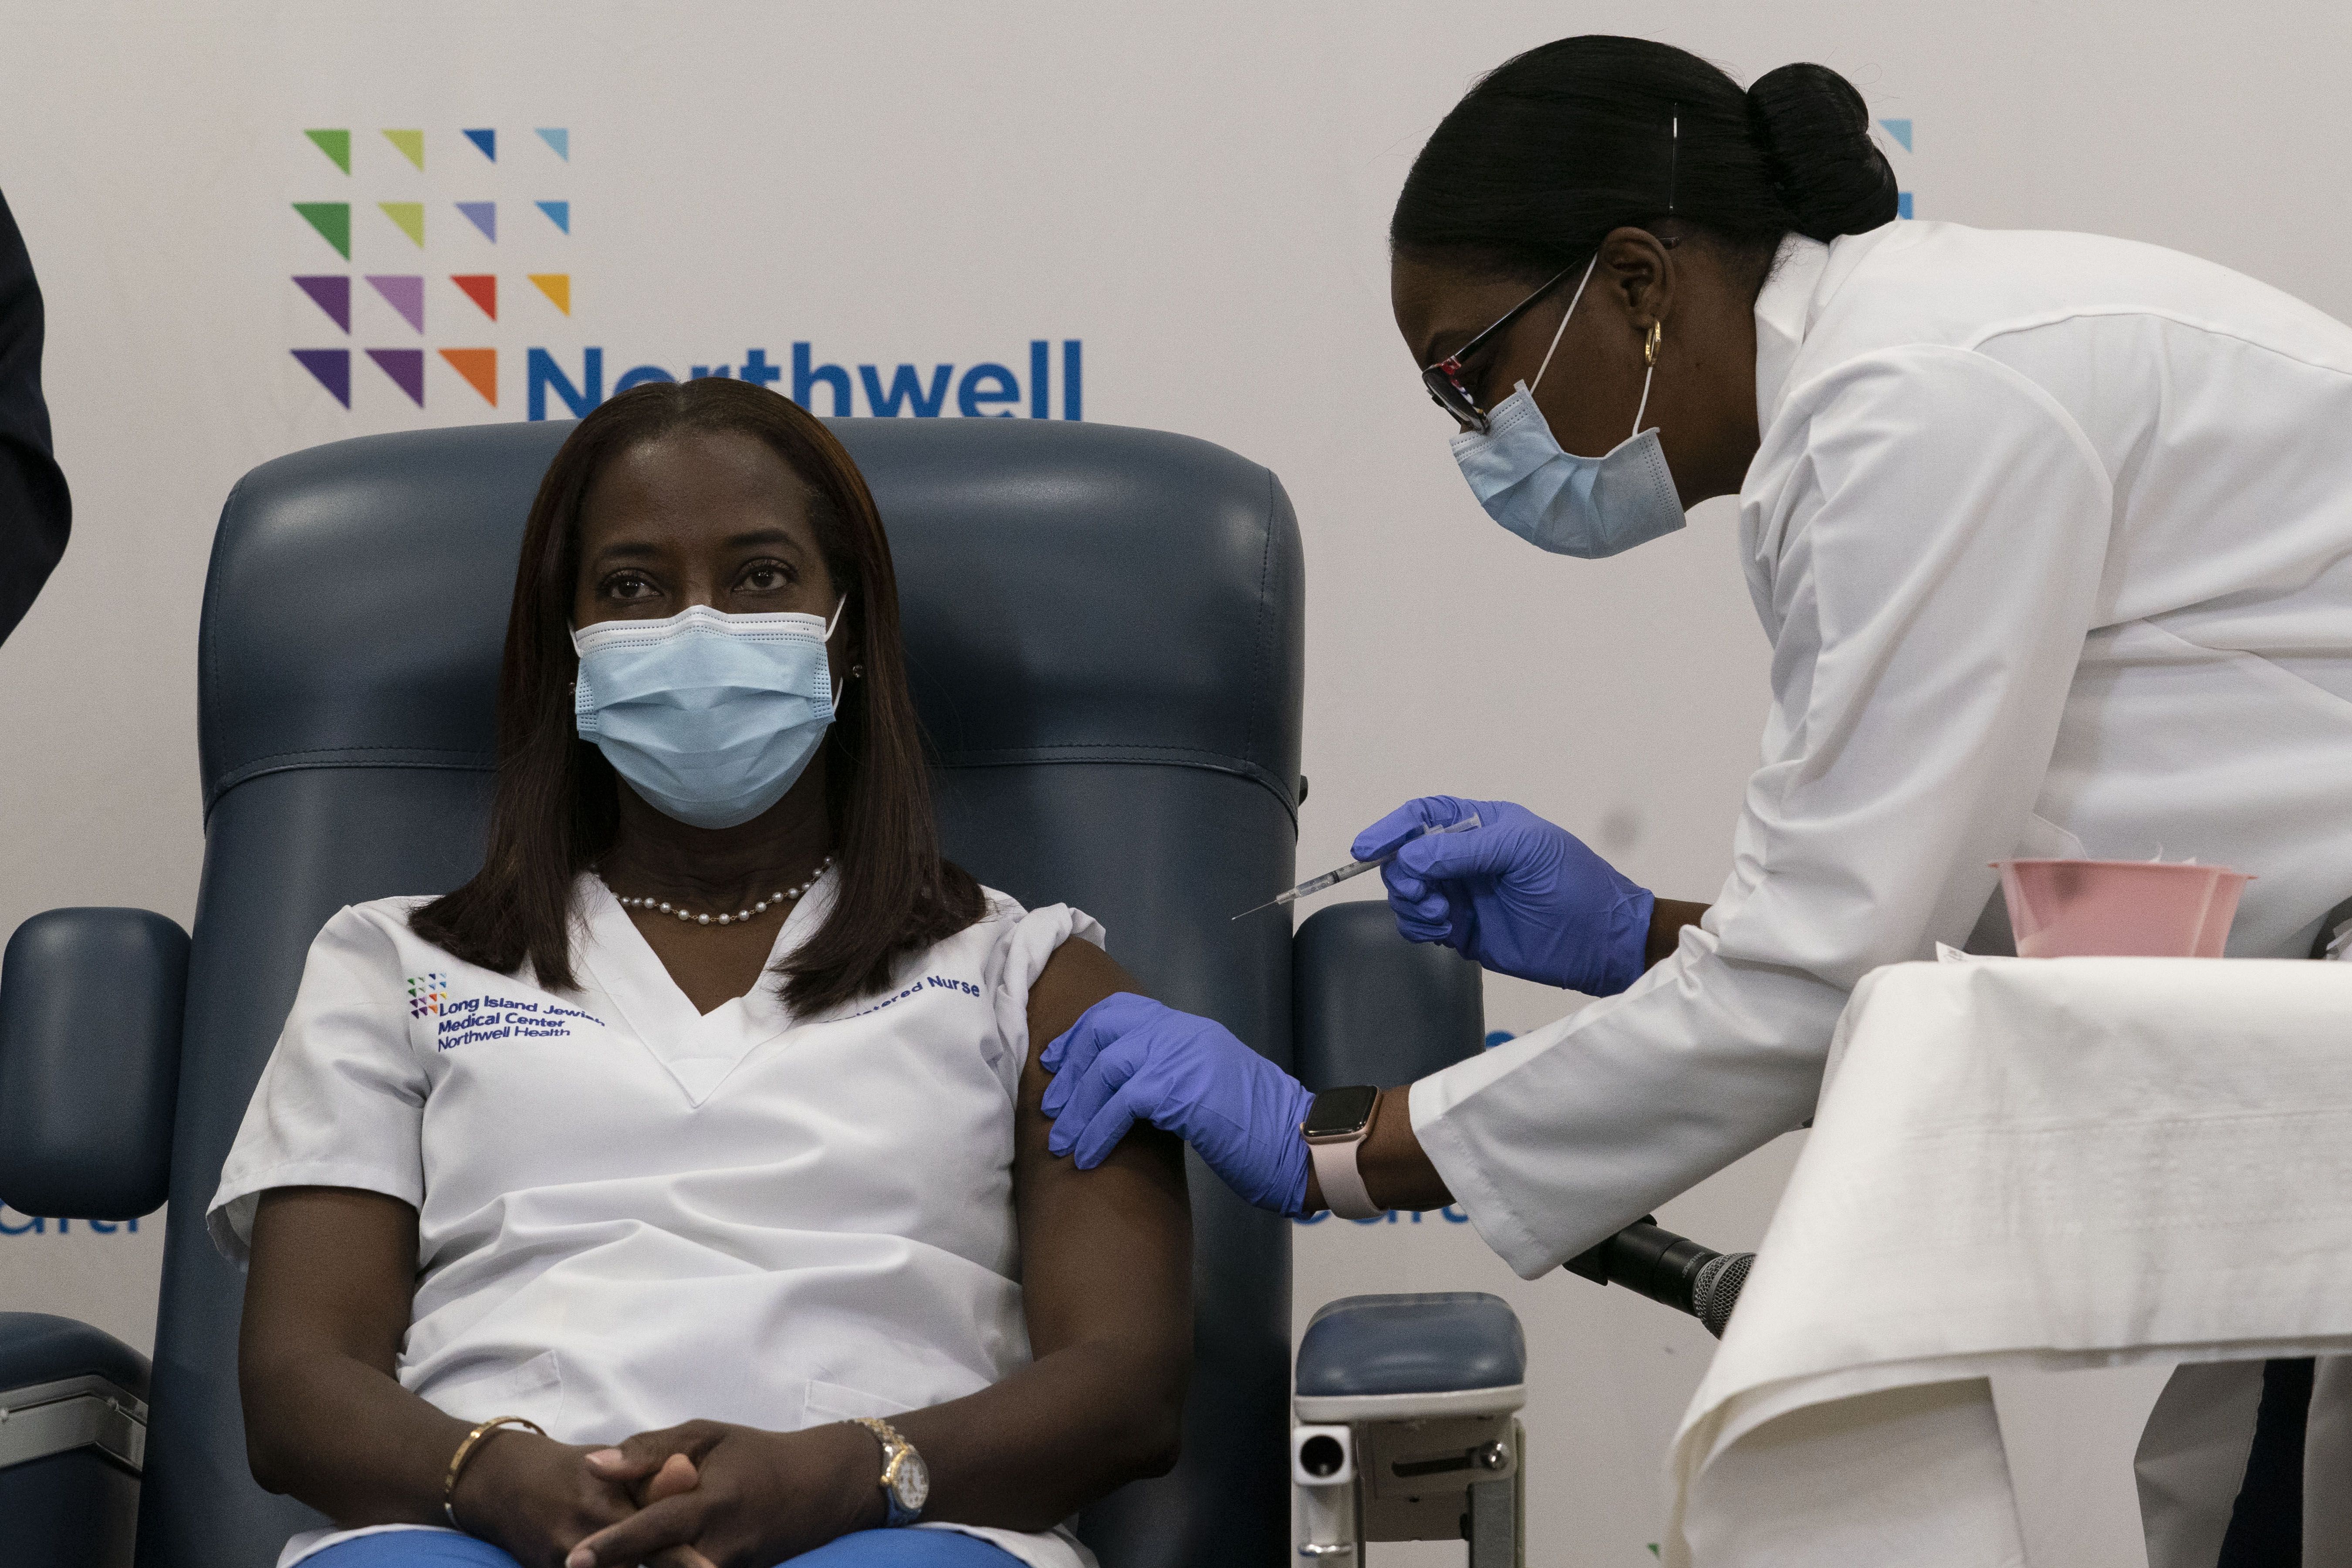 Sandra Lindsay, a nurse, is inoculated with the COVID-19 vaccine on Dec. 14 in Queens, New York City. Photo: Mark Lennihan - Pool/Getty Images